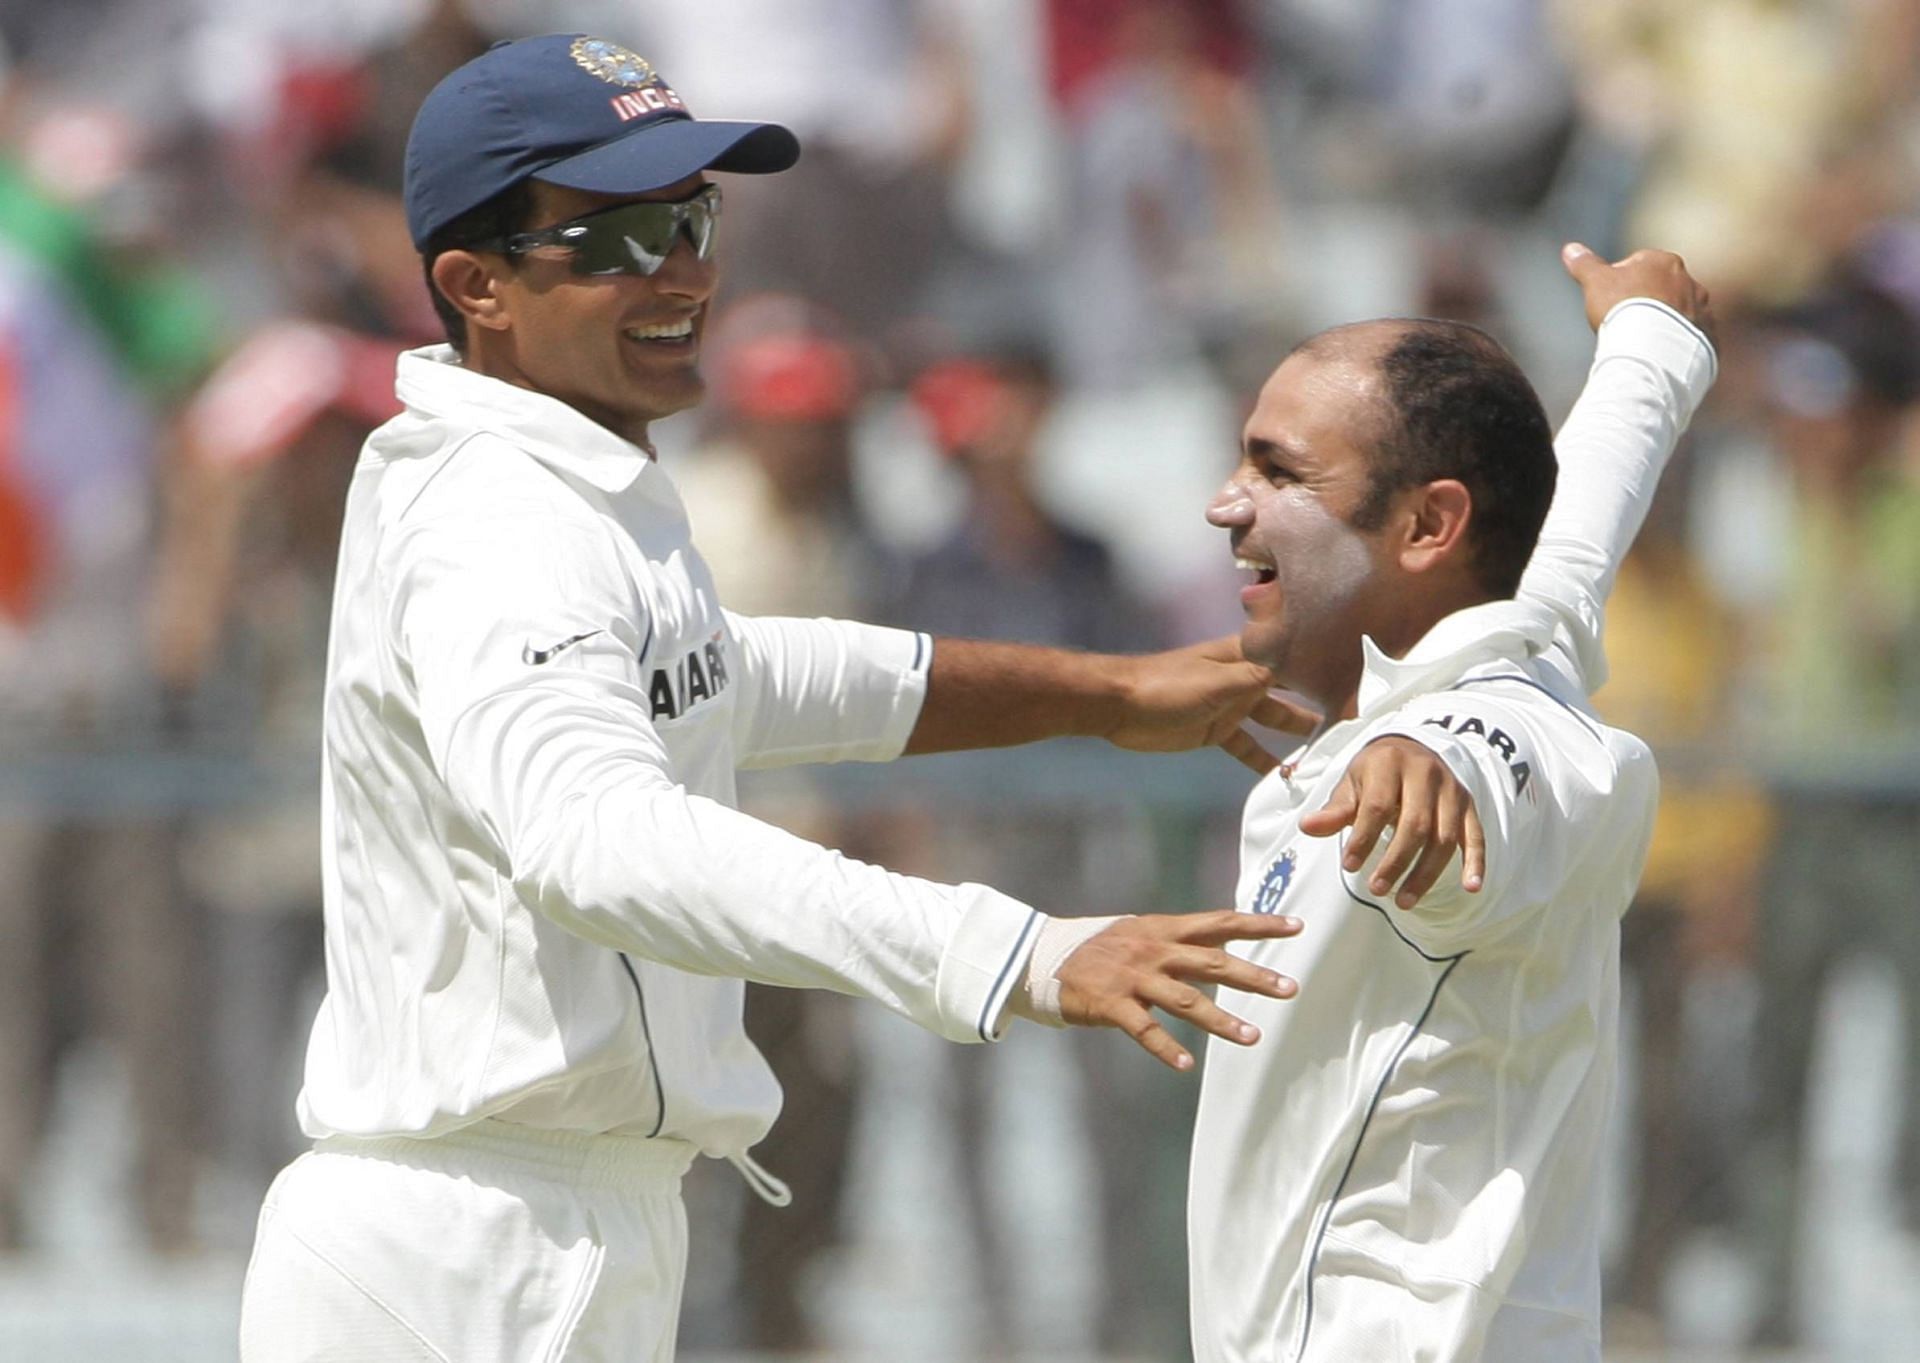 Sourav Ganguly and Virender Sehwag played a lot of cricket together (Image: Getty)